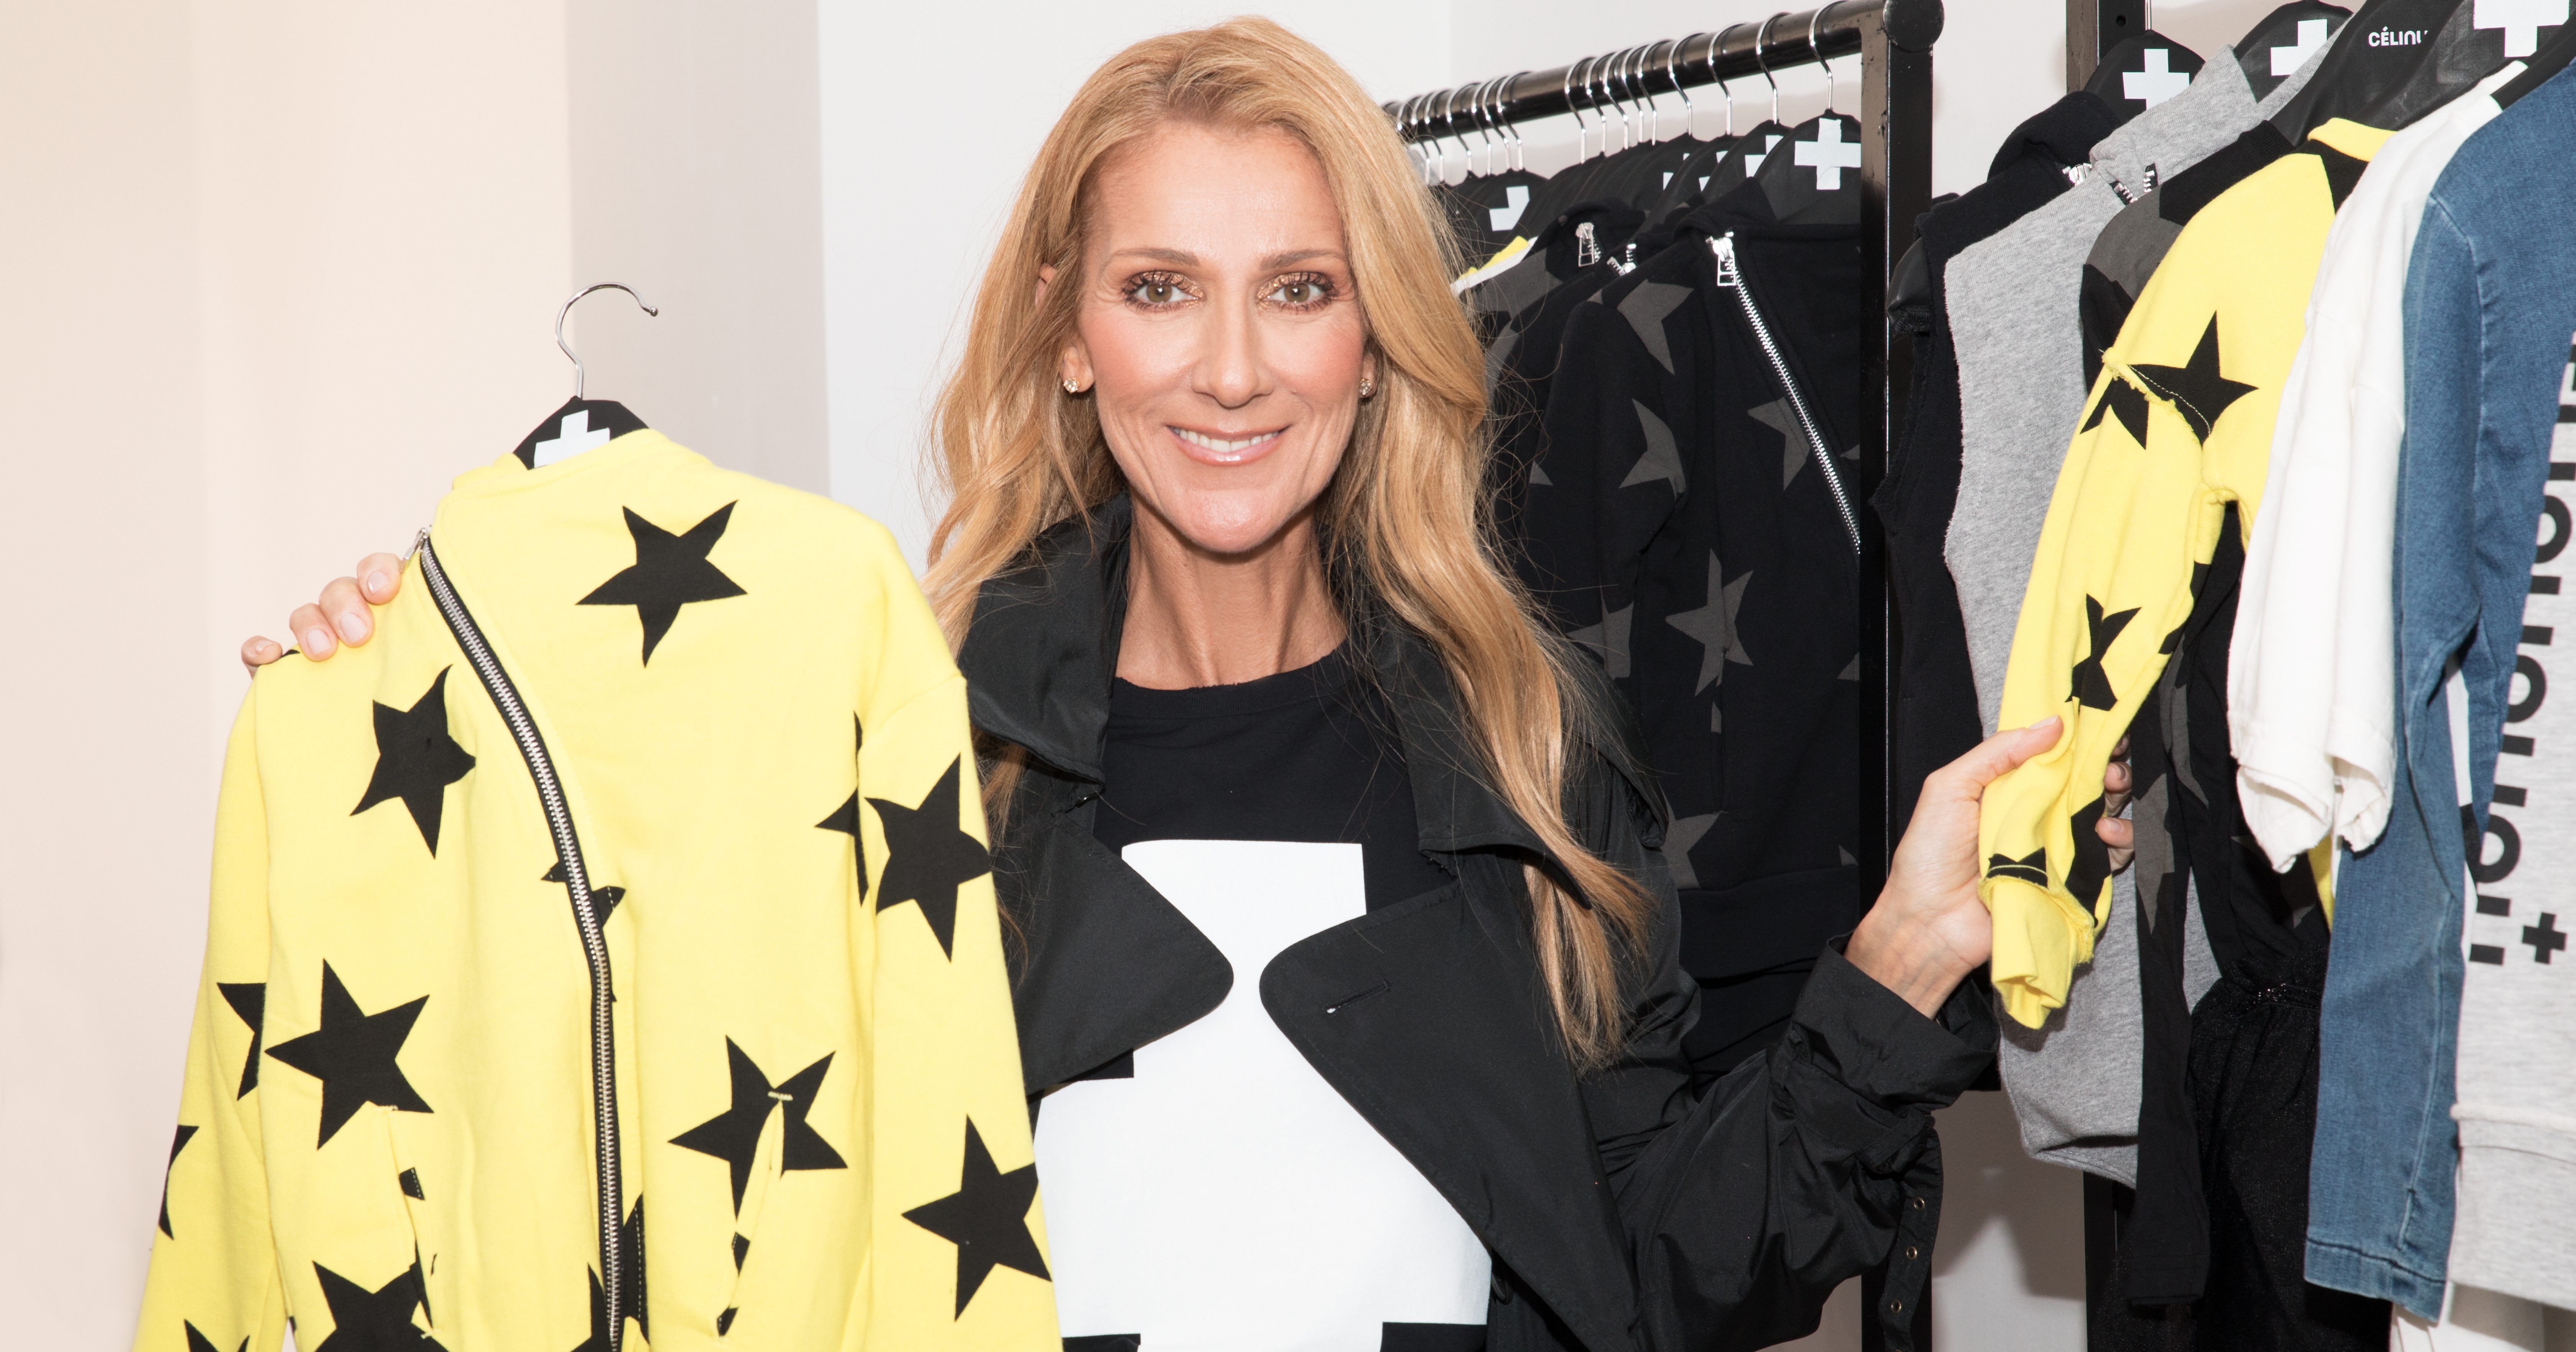 Celine Dion showing off her line of clothing in partnership with Nununu clothing